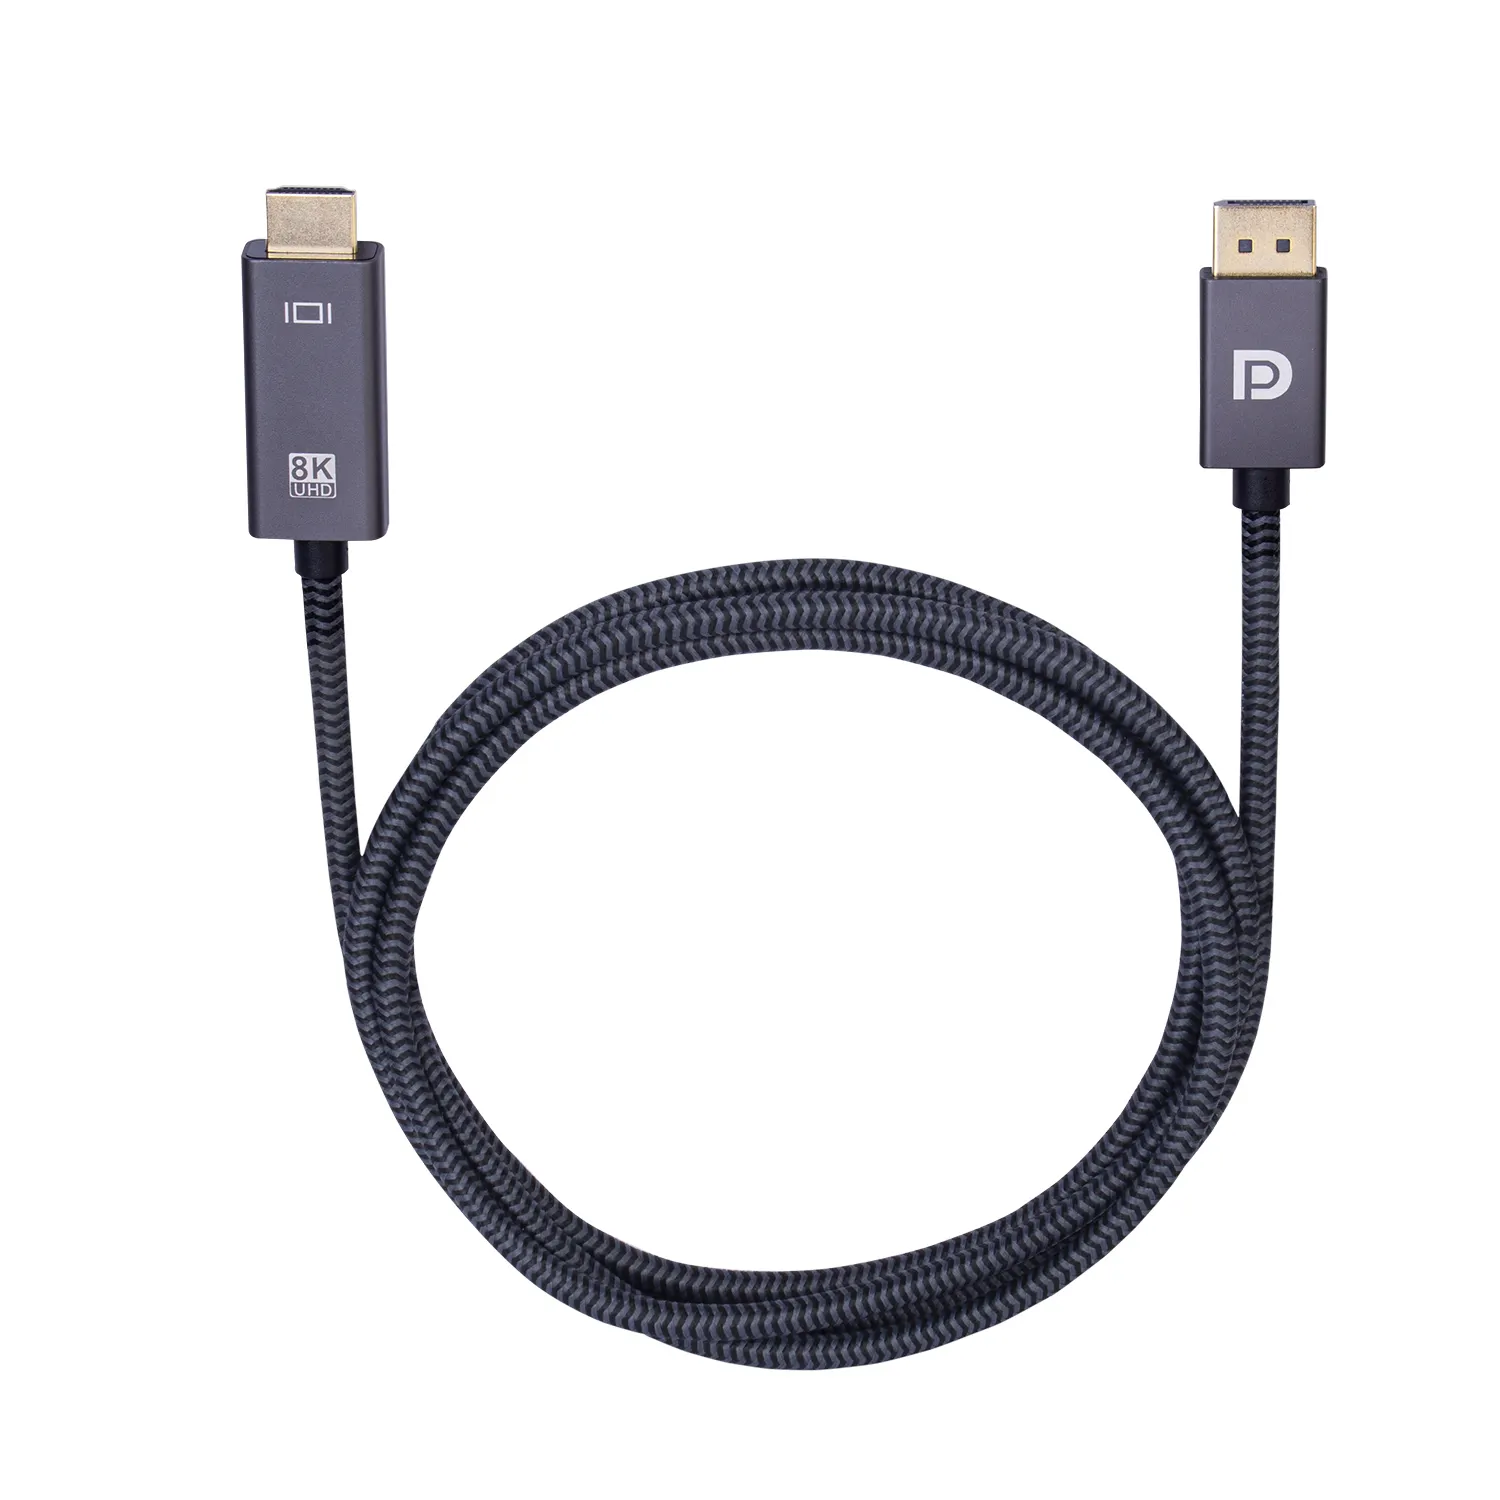 DP to HDMI conversion connection data cable 8K@60Hz high-definition DisplayPort to hdmi external graphics card